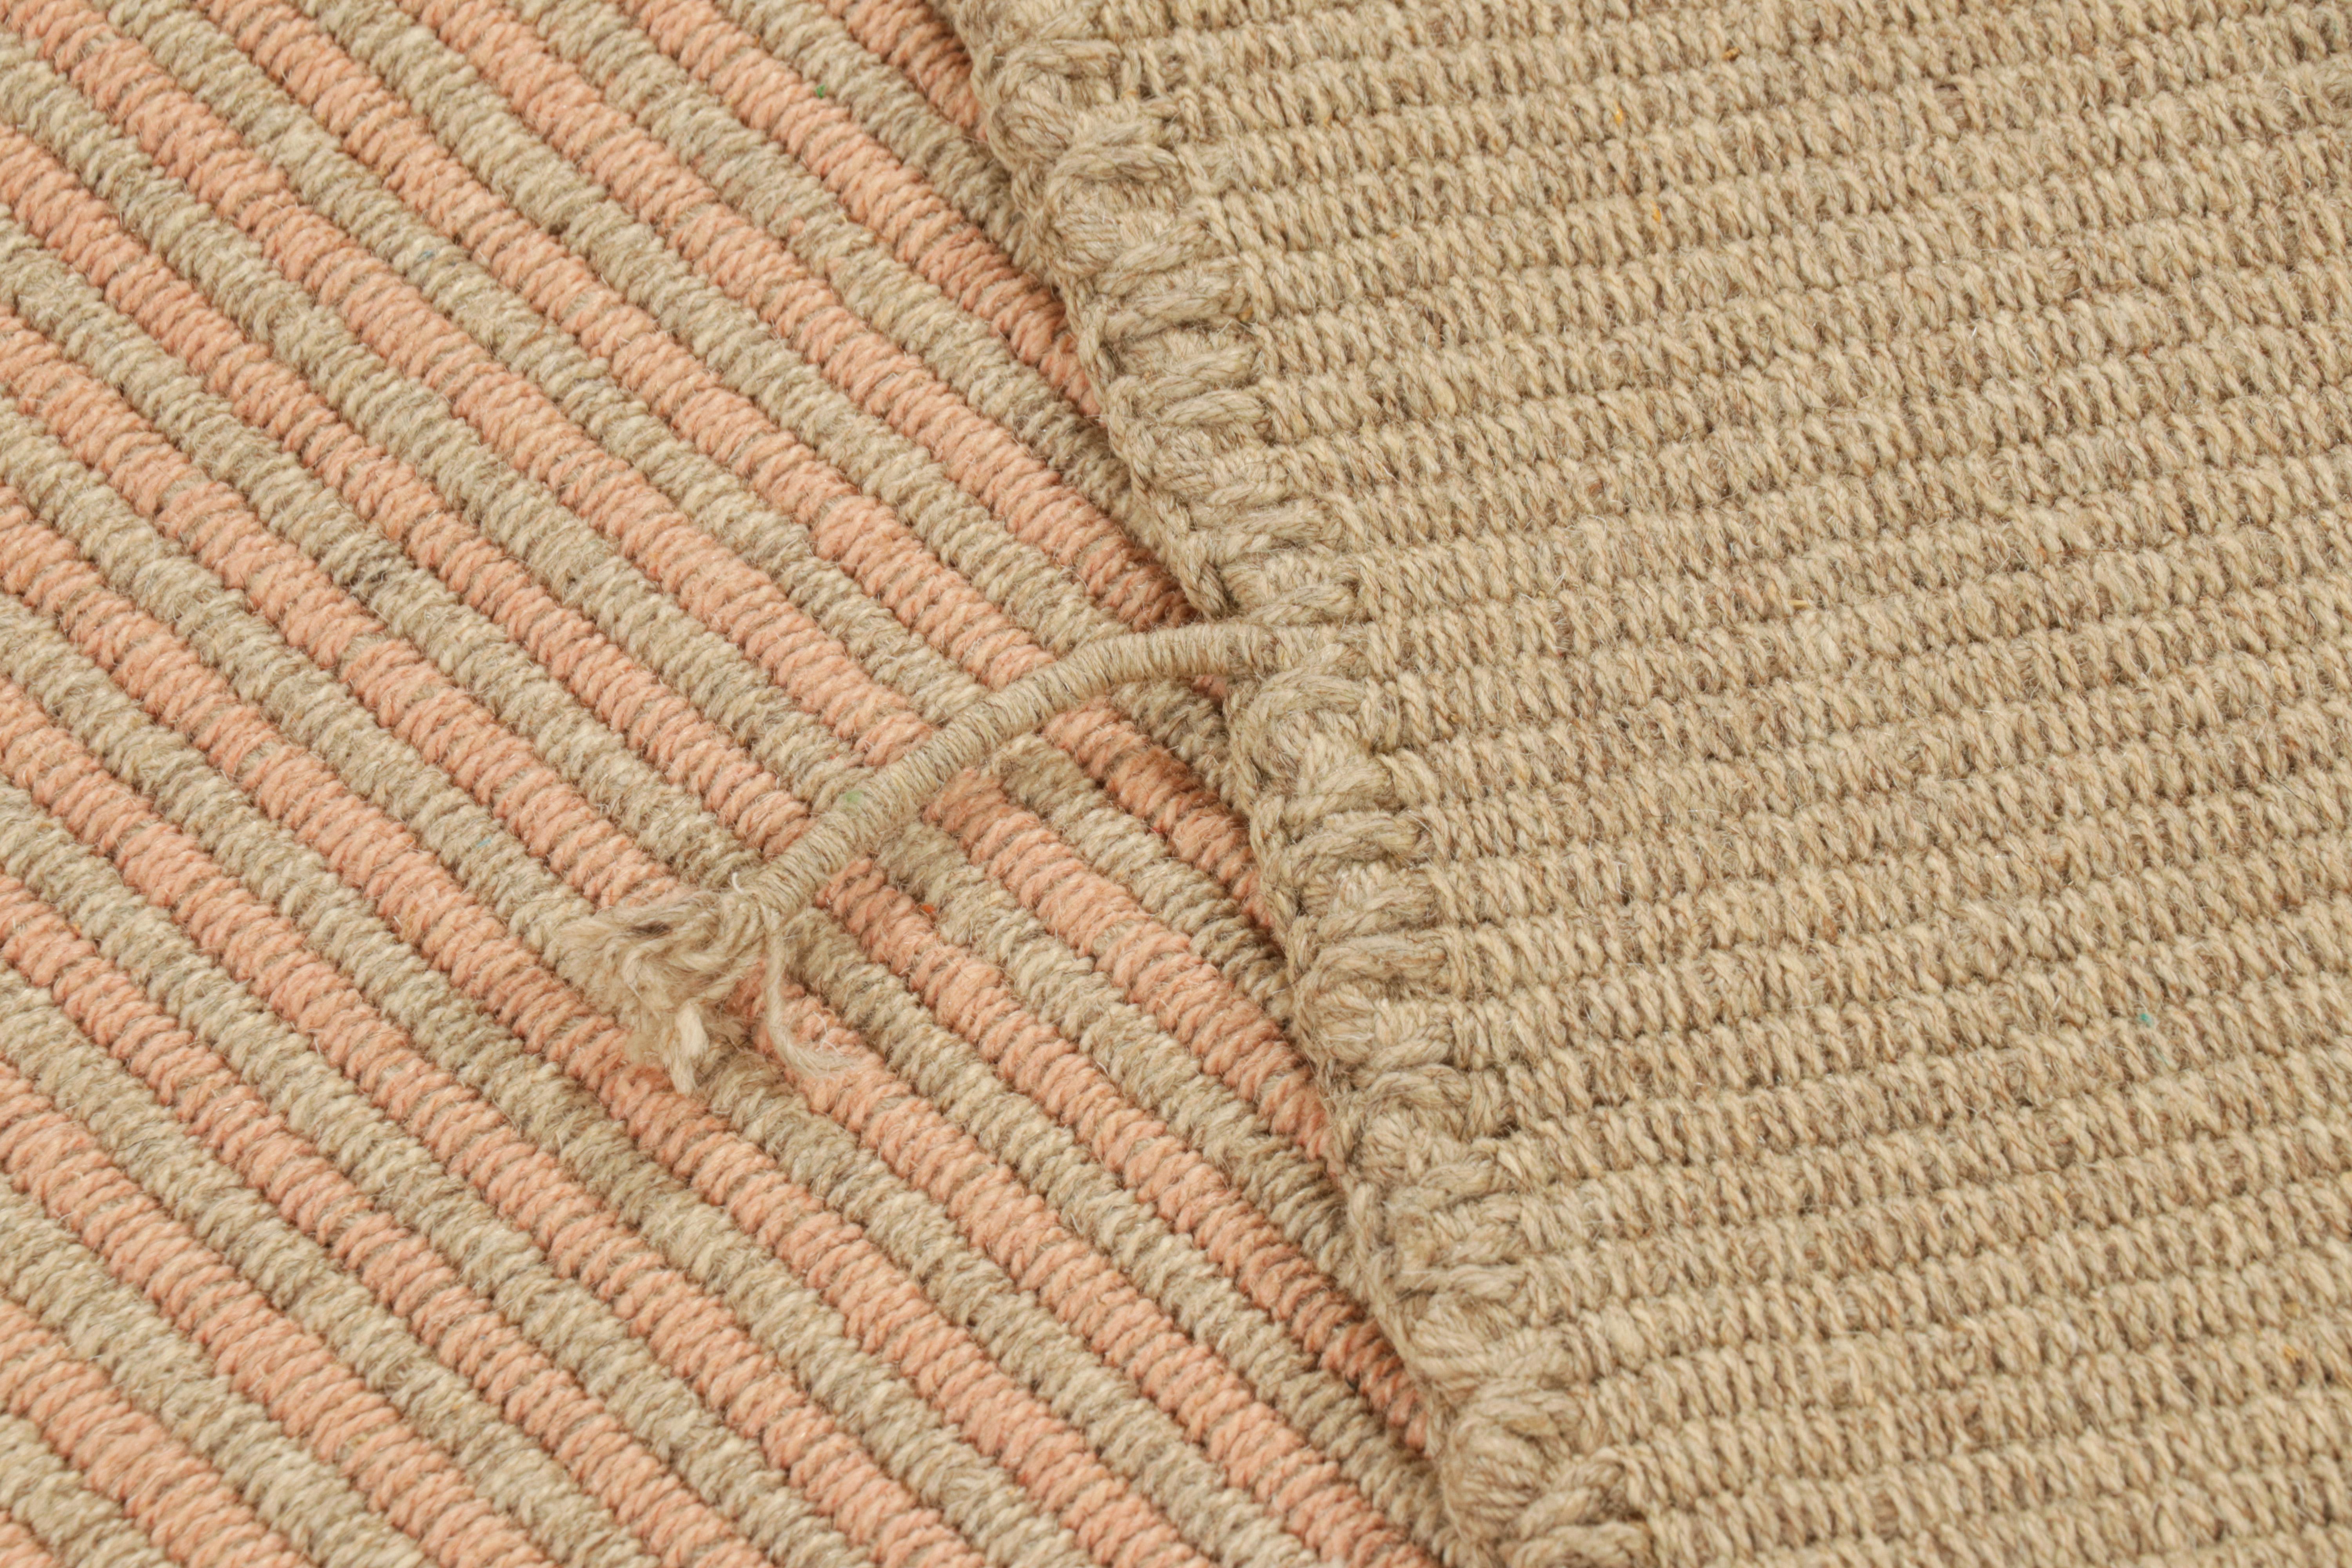 Rug & Kilim’s Contemporary Kilim in Peach and Beige Textural Stripes  For Sale 1